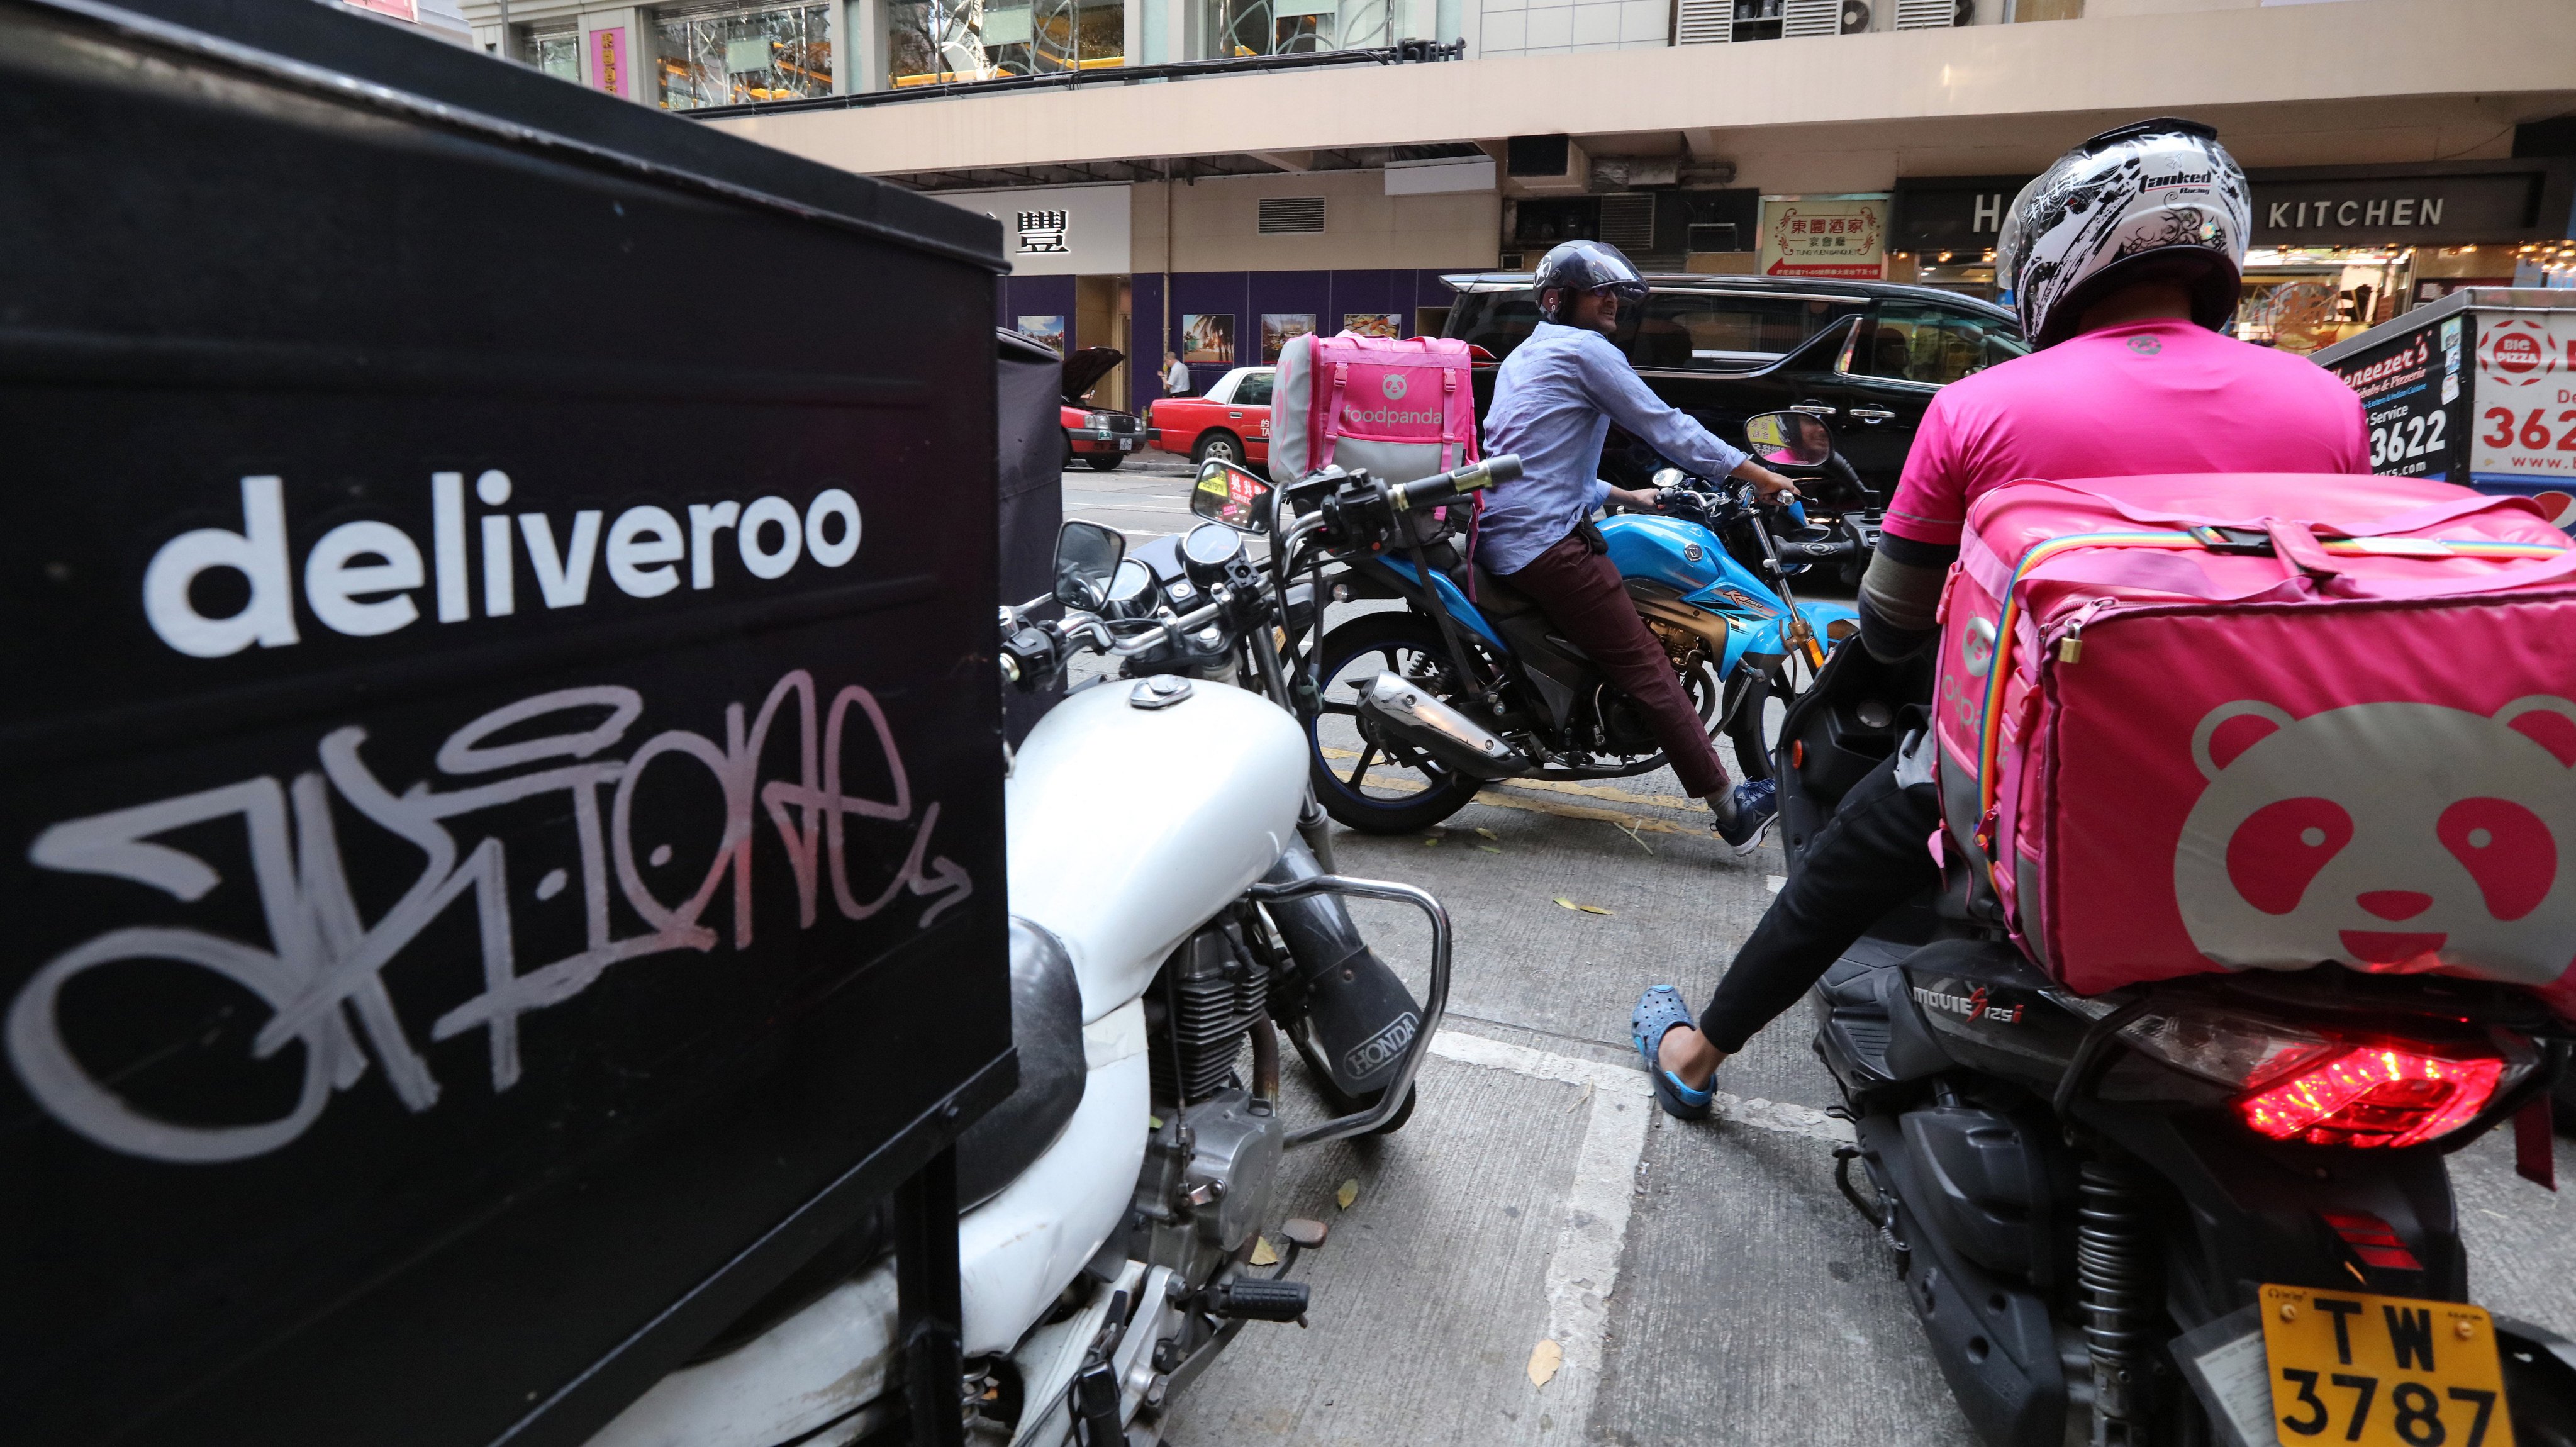 The watchdog has given Foodpanda and Deliveroo 90 days to introduce their amended deals for local restaurants. Photo: Felix Wong